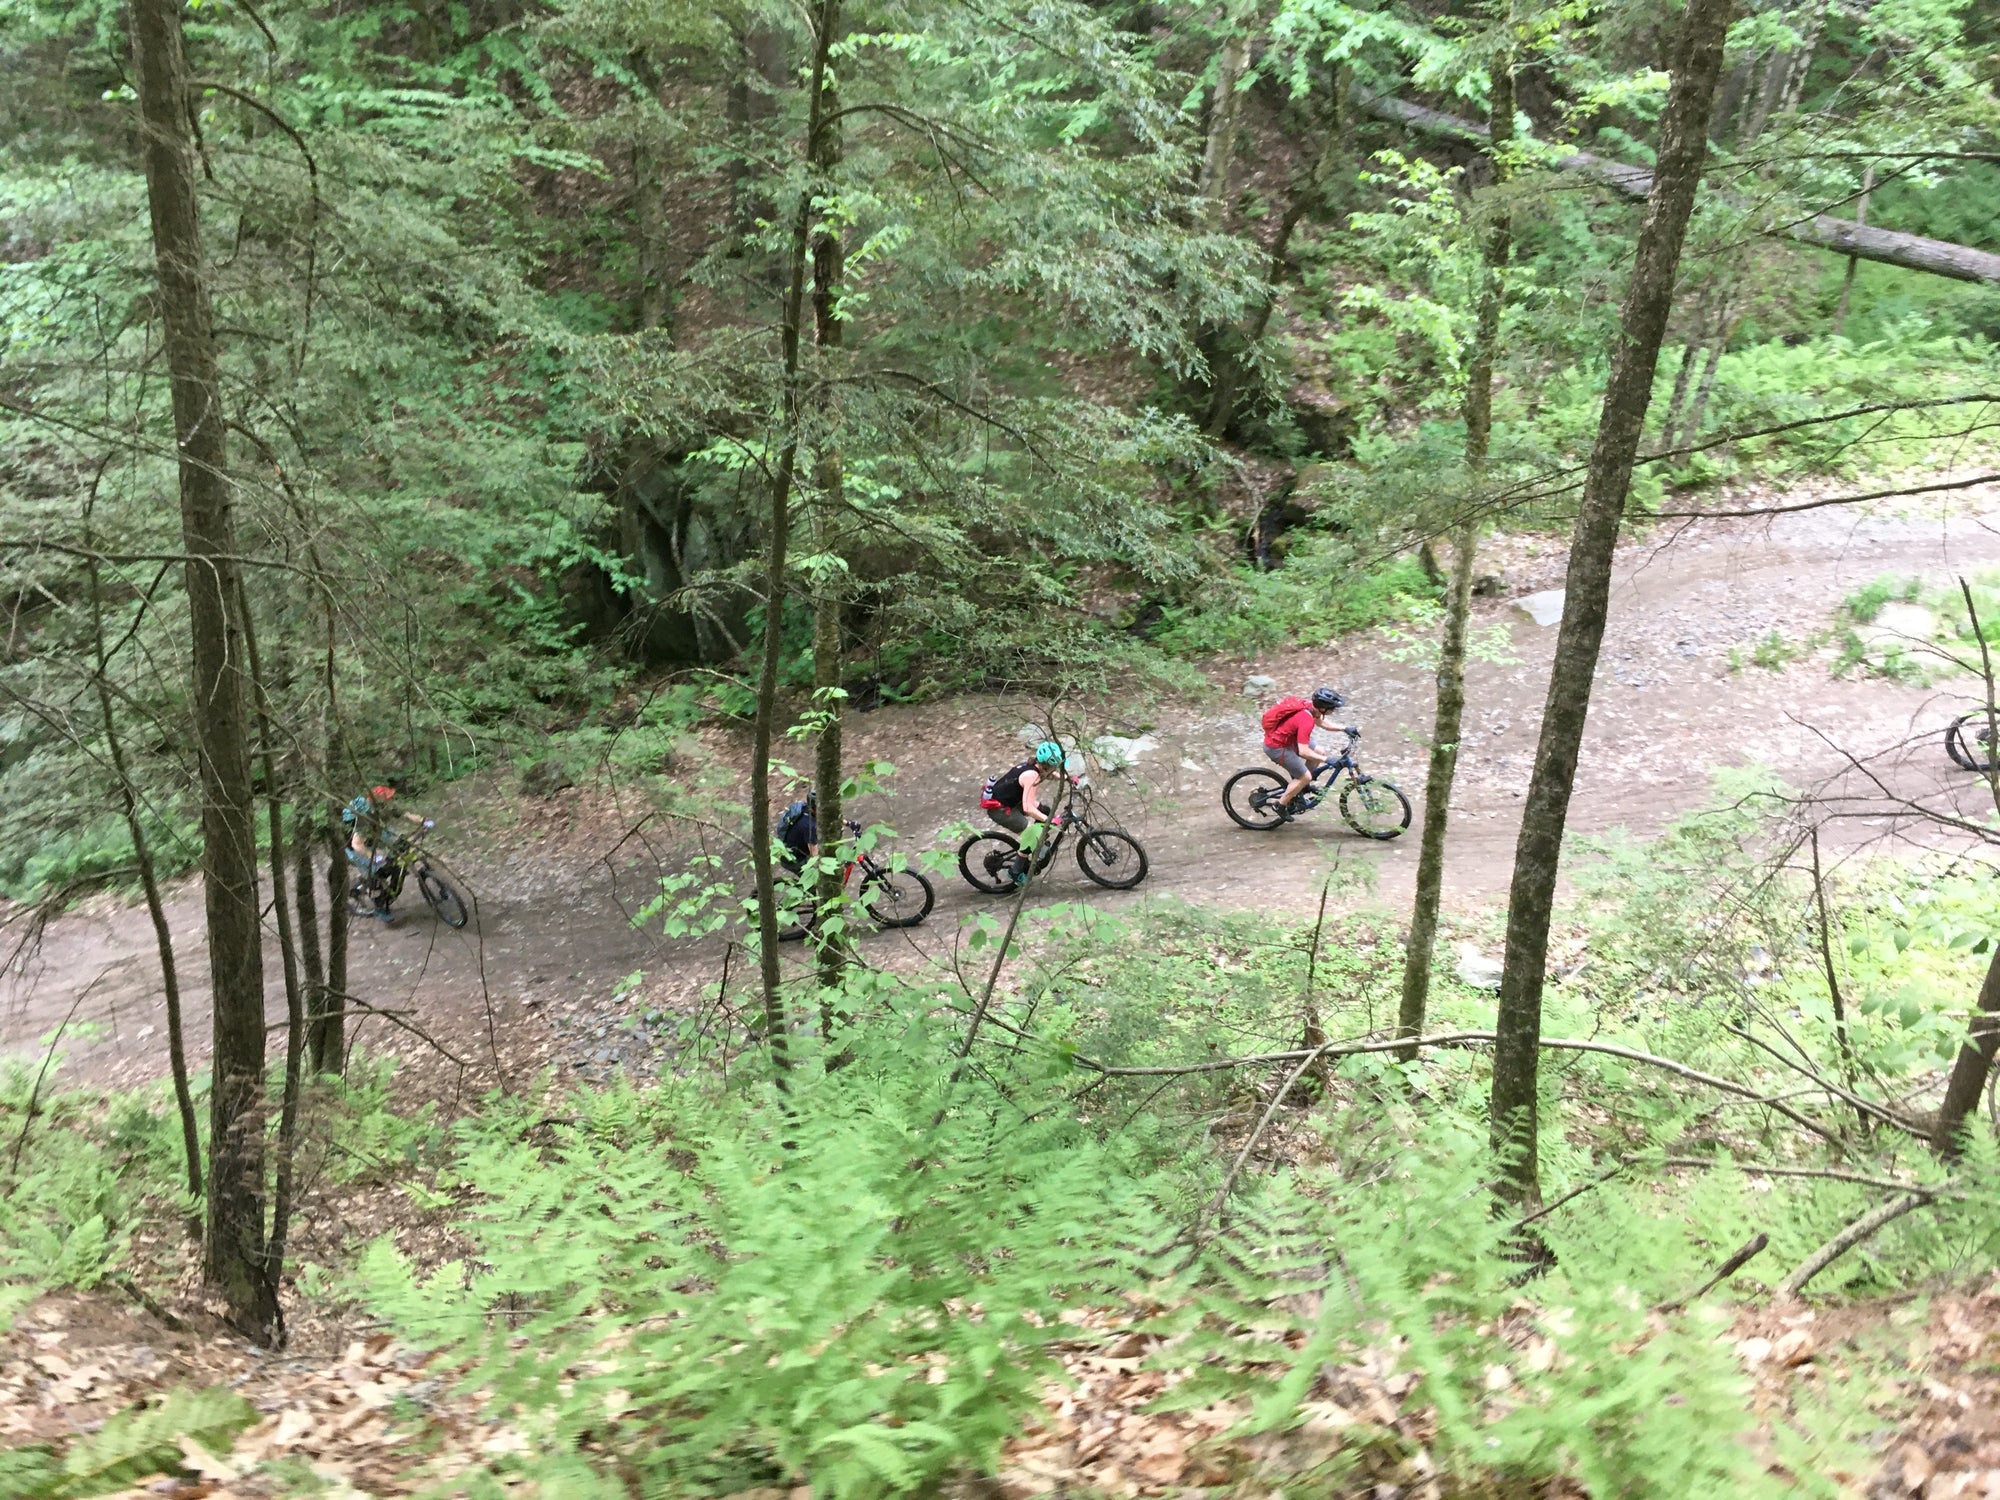 looking down on three mountain bikers riding on a trail below